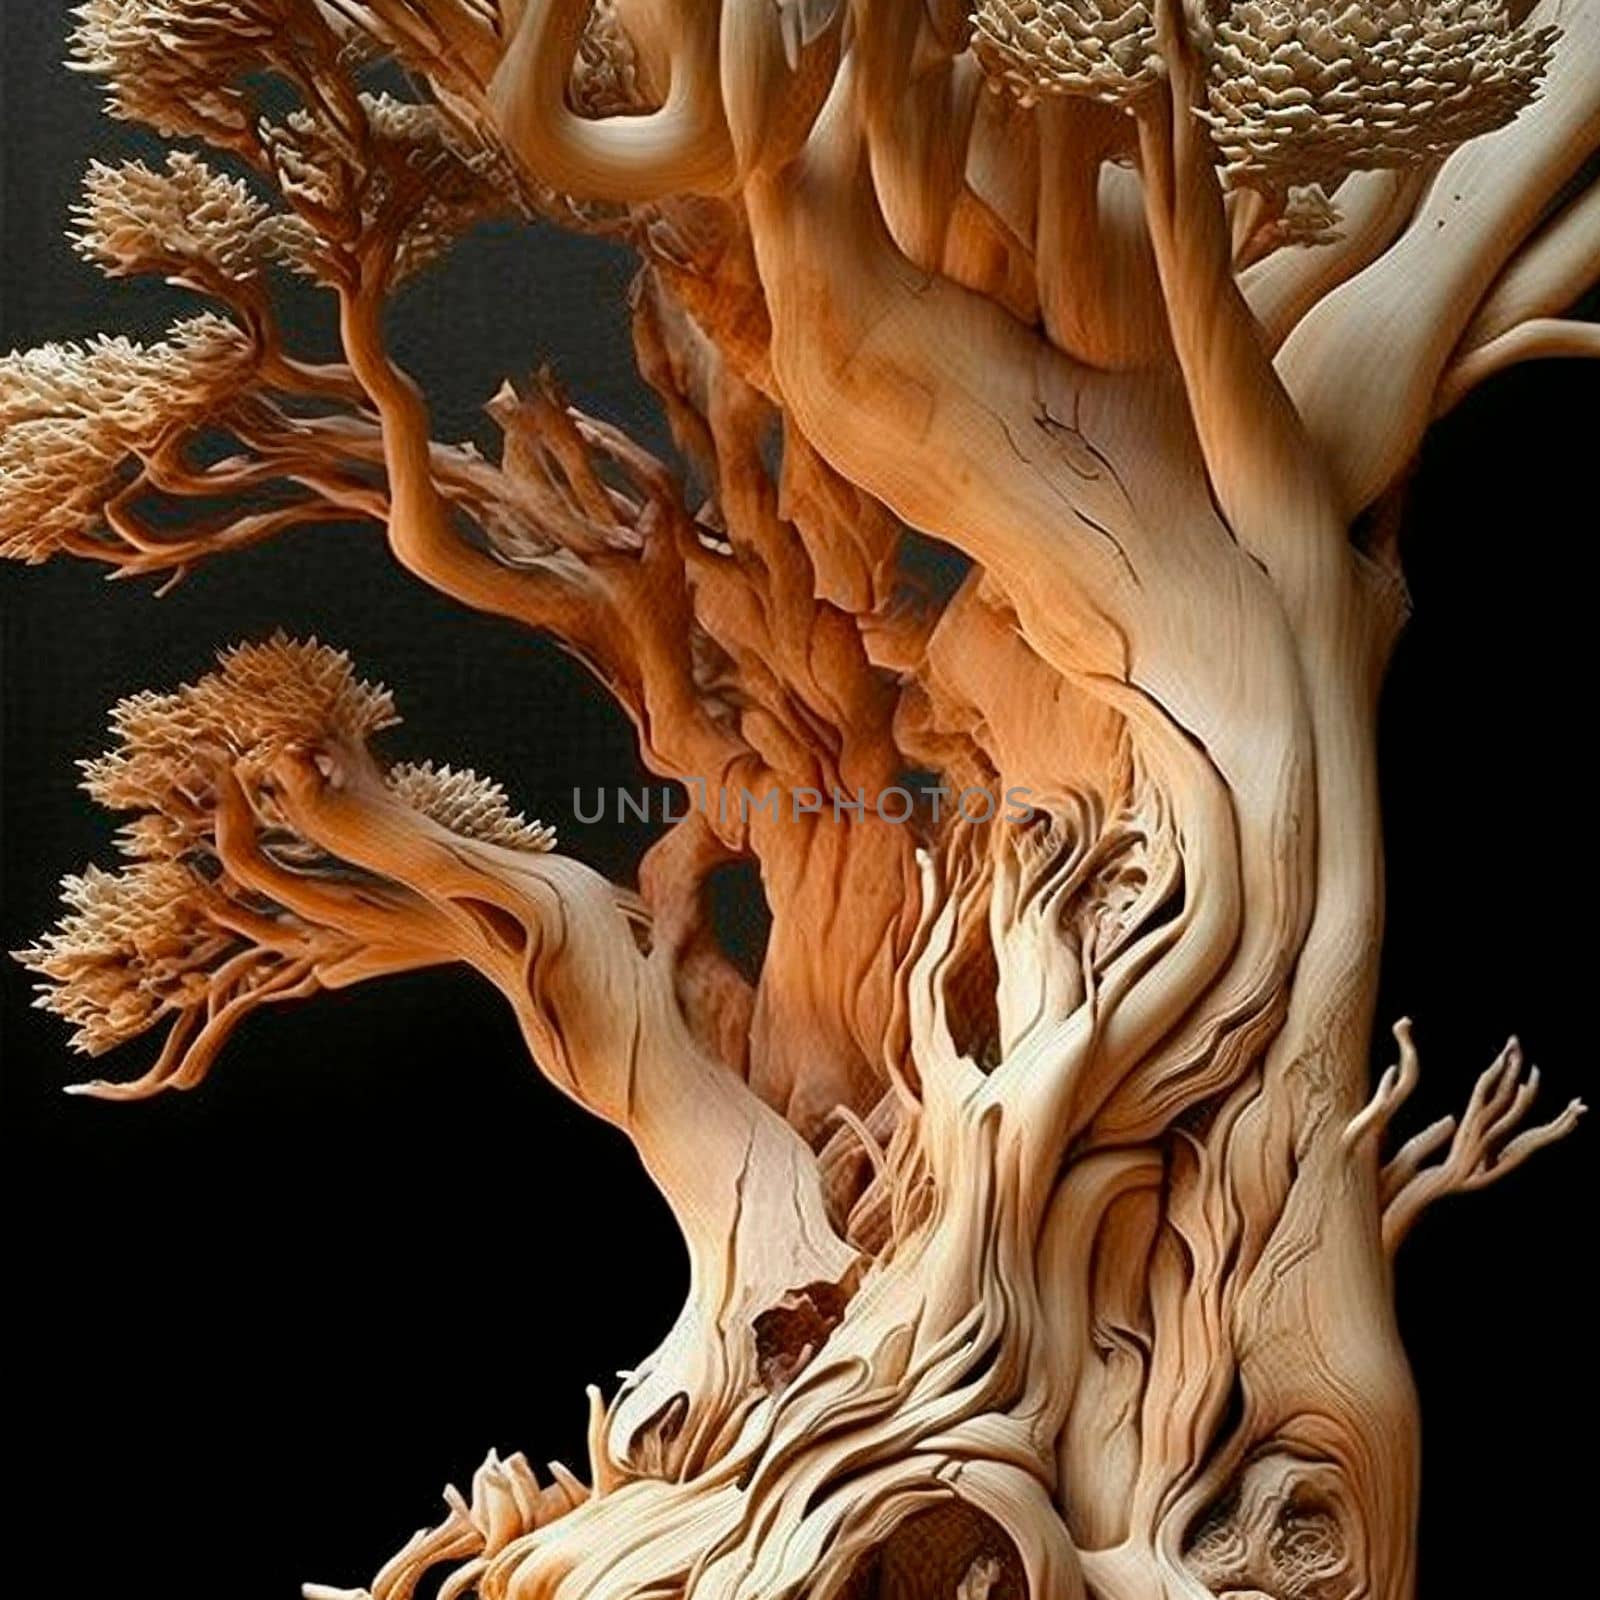 a mock-up of a tree carved out of wood by NeuroSky